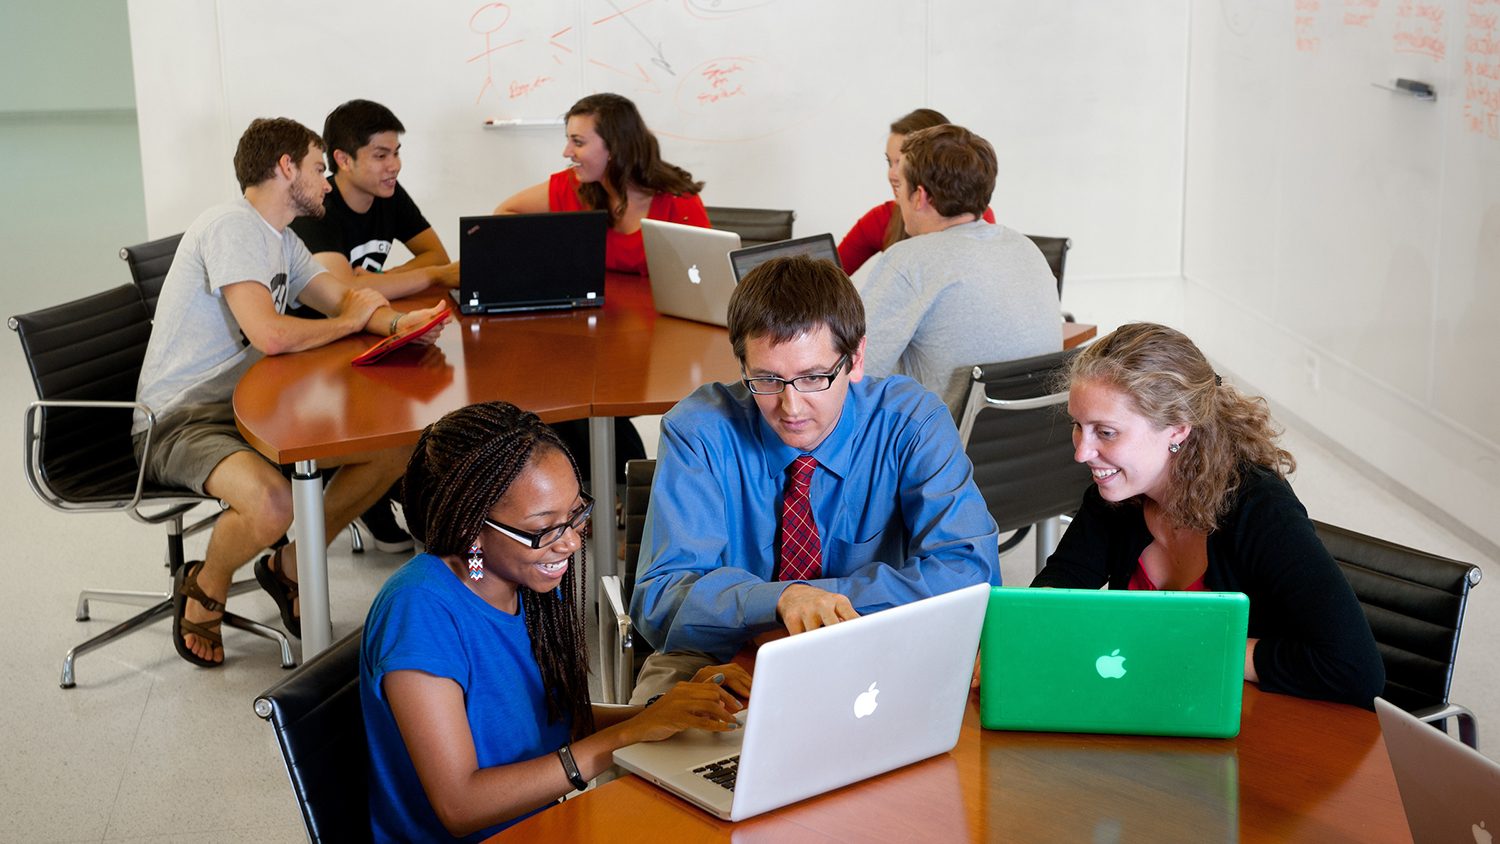 Faculty and students looking at a computer